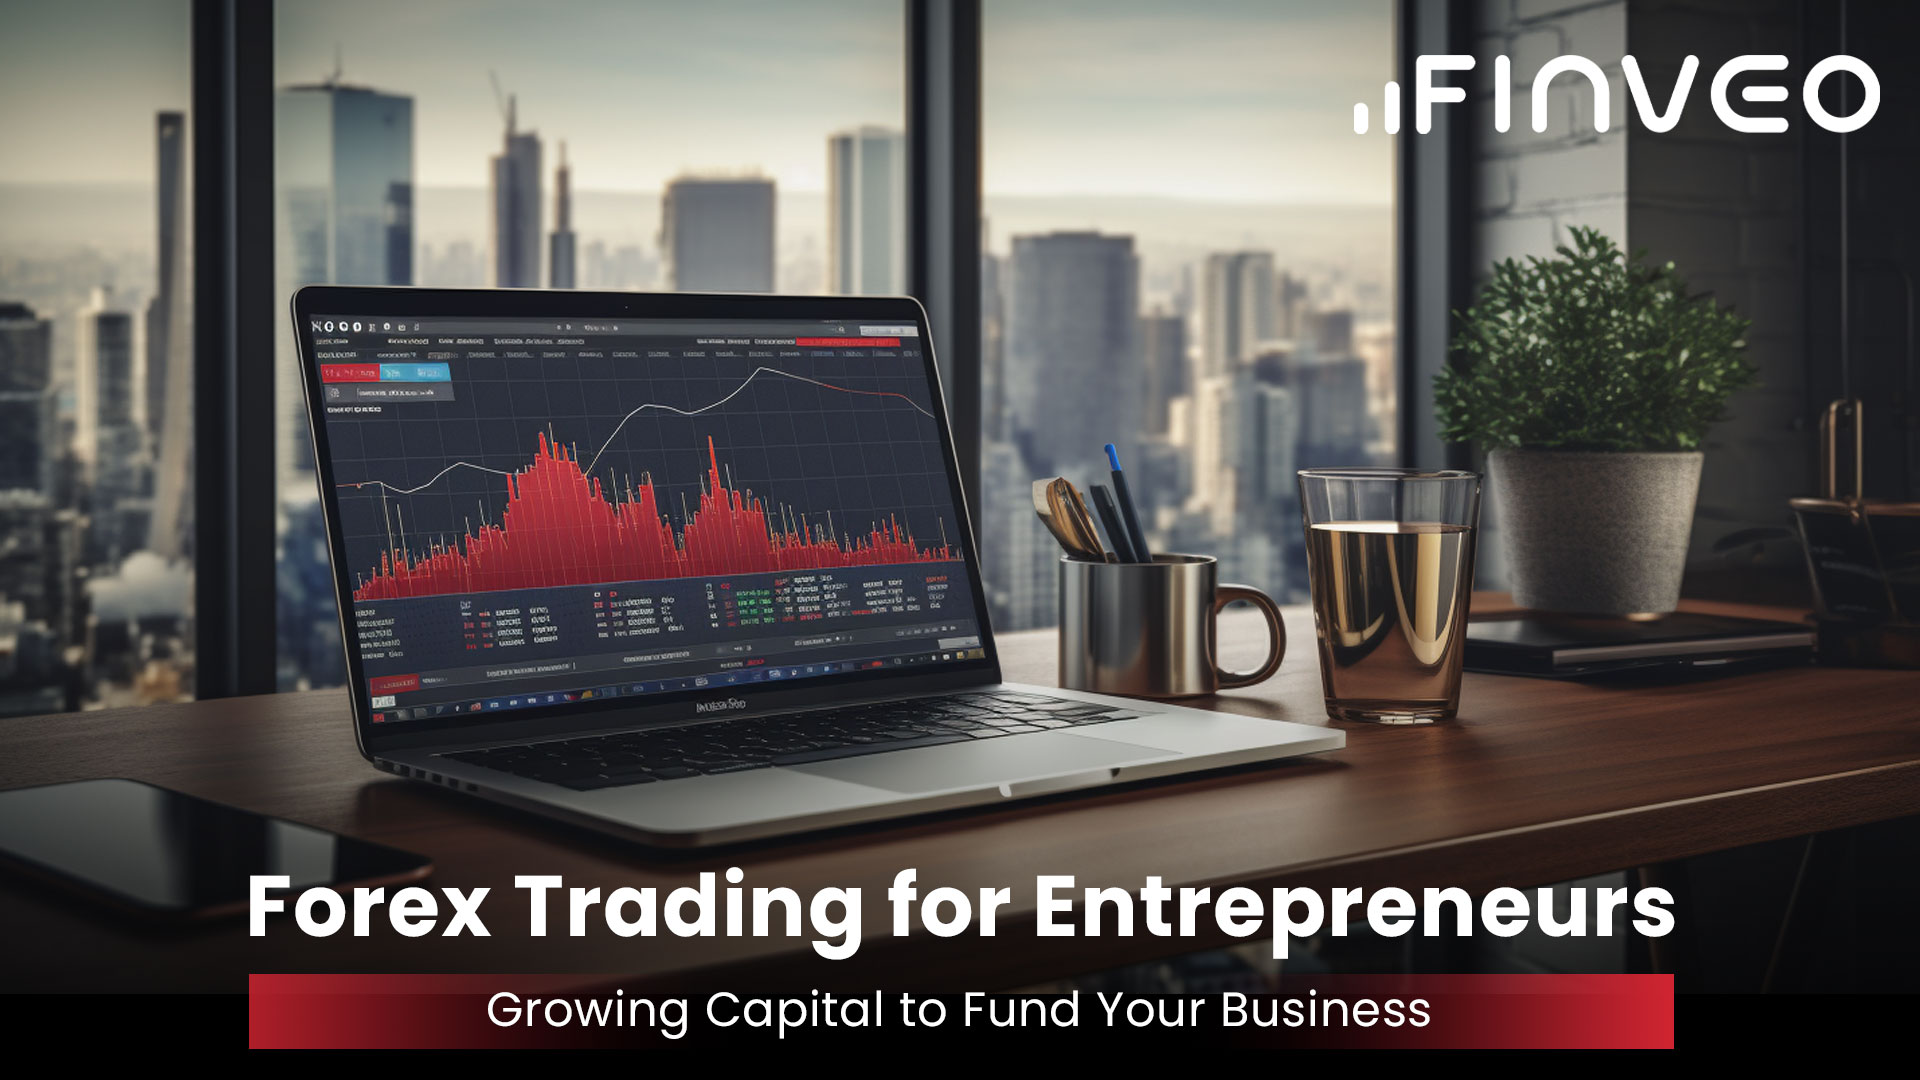 Forex Trading for Entrepreneurs: Growing Capital to Fund Your Business